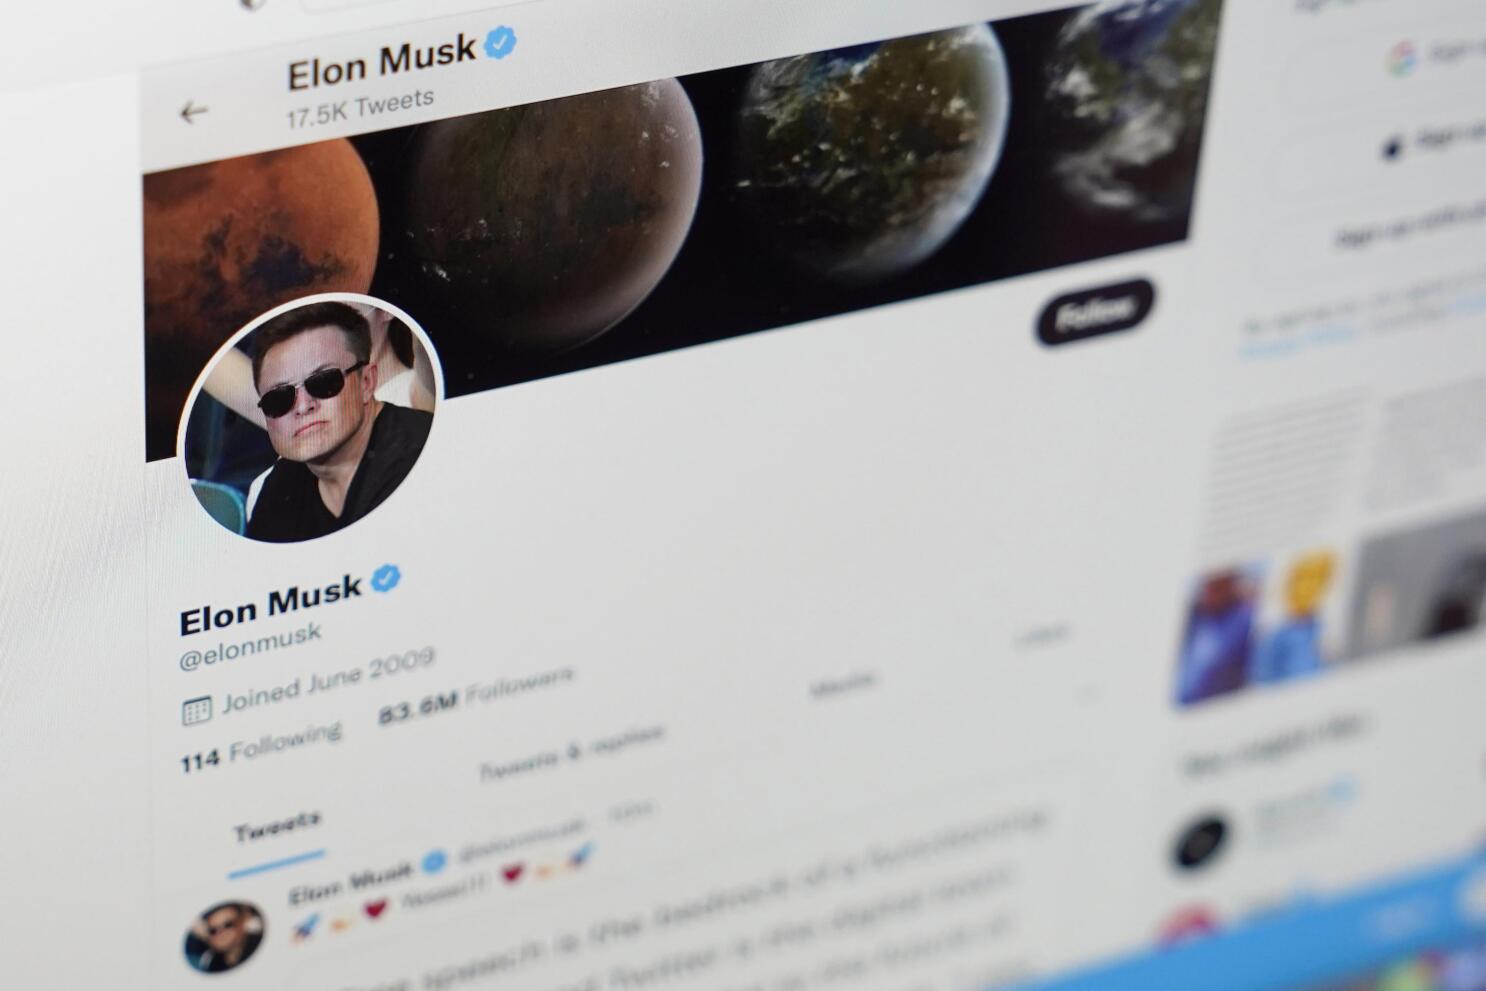 Elon Musk appears to fire software engineer who argued with him on